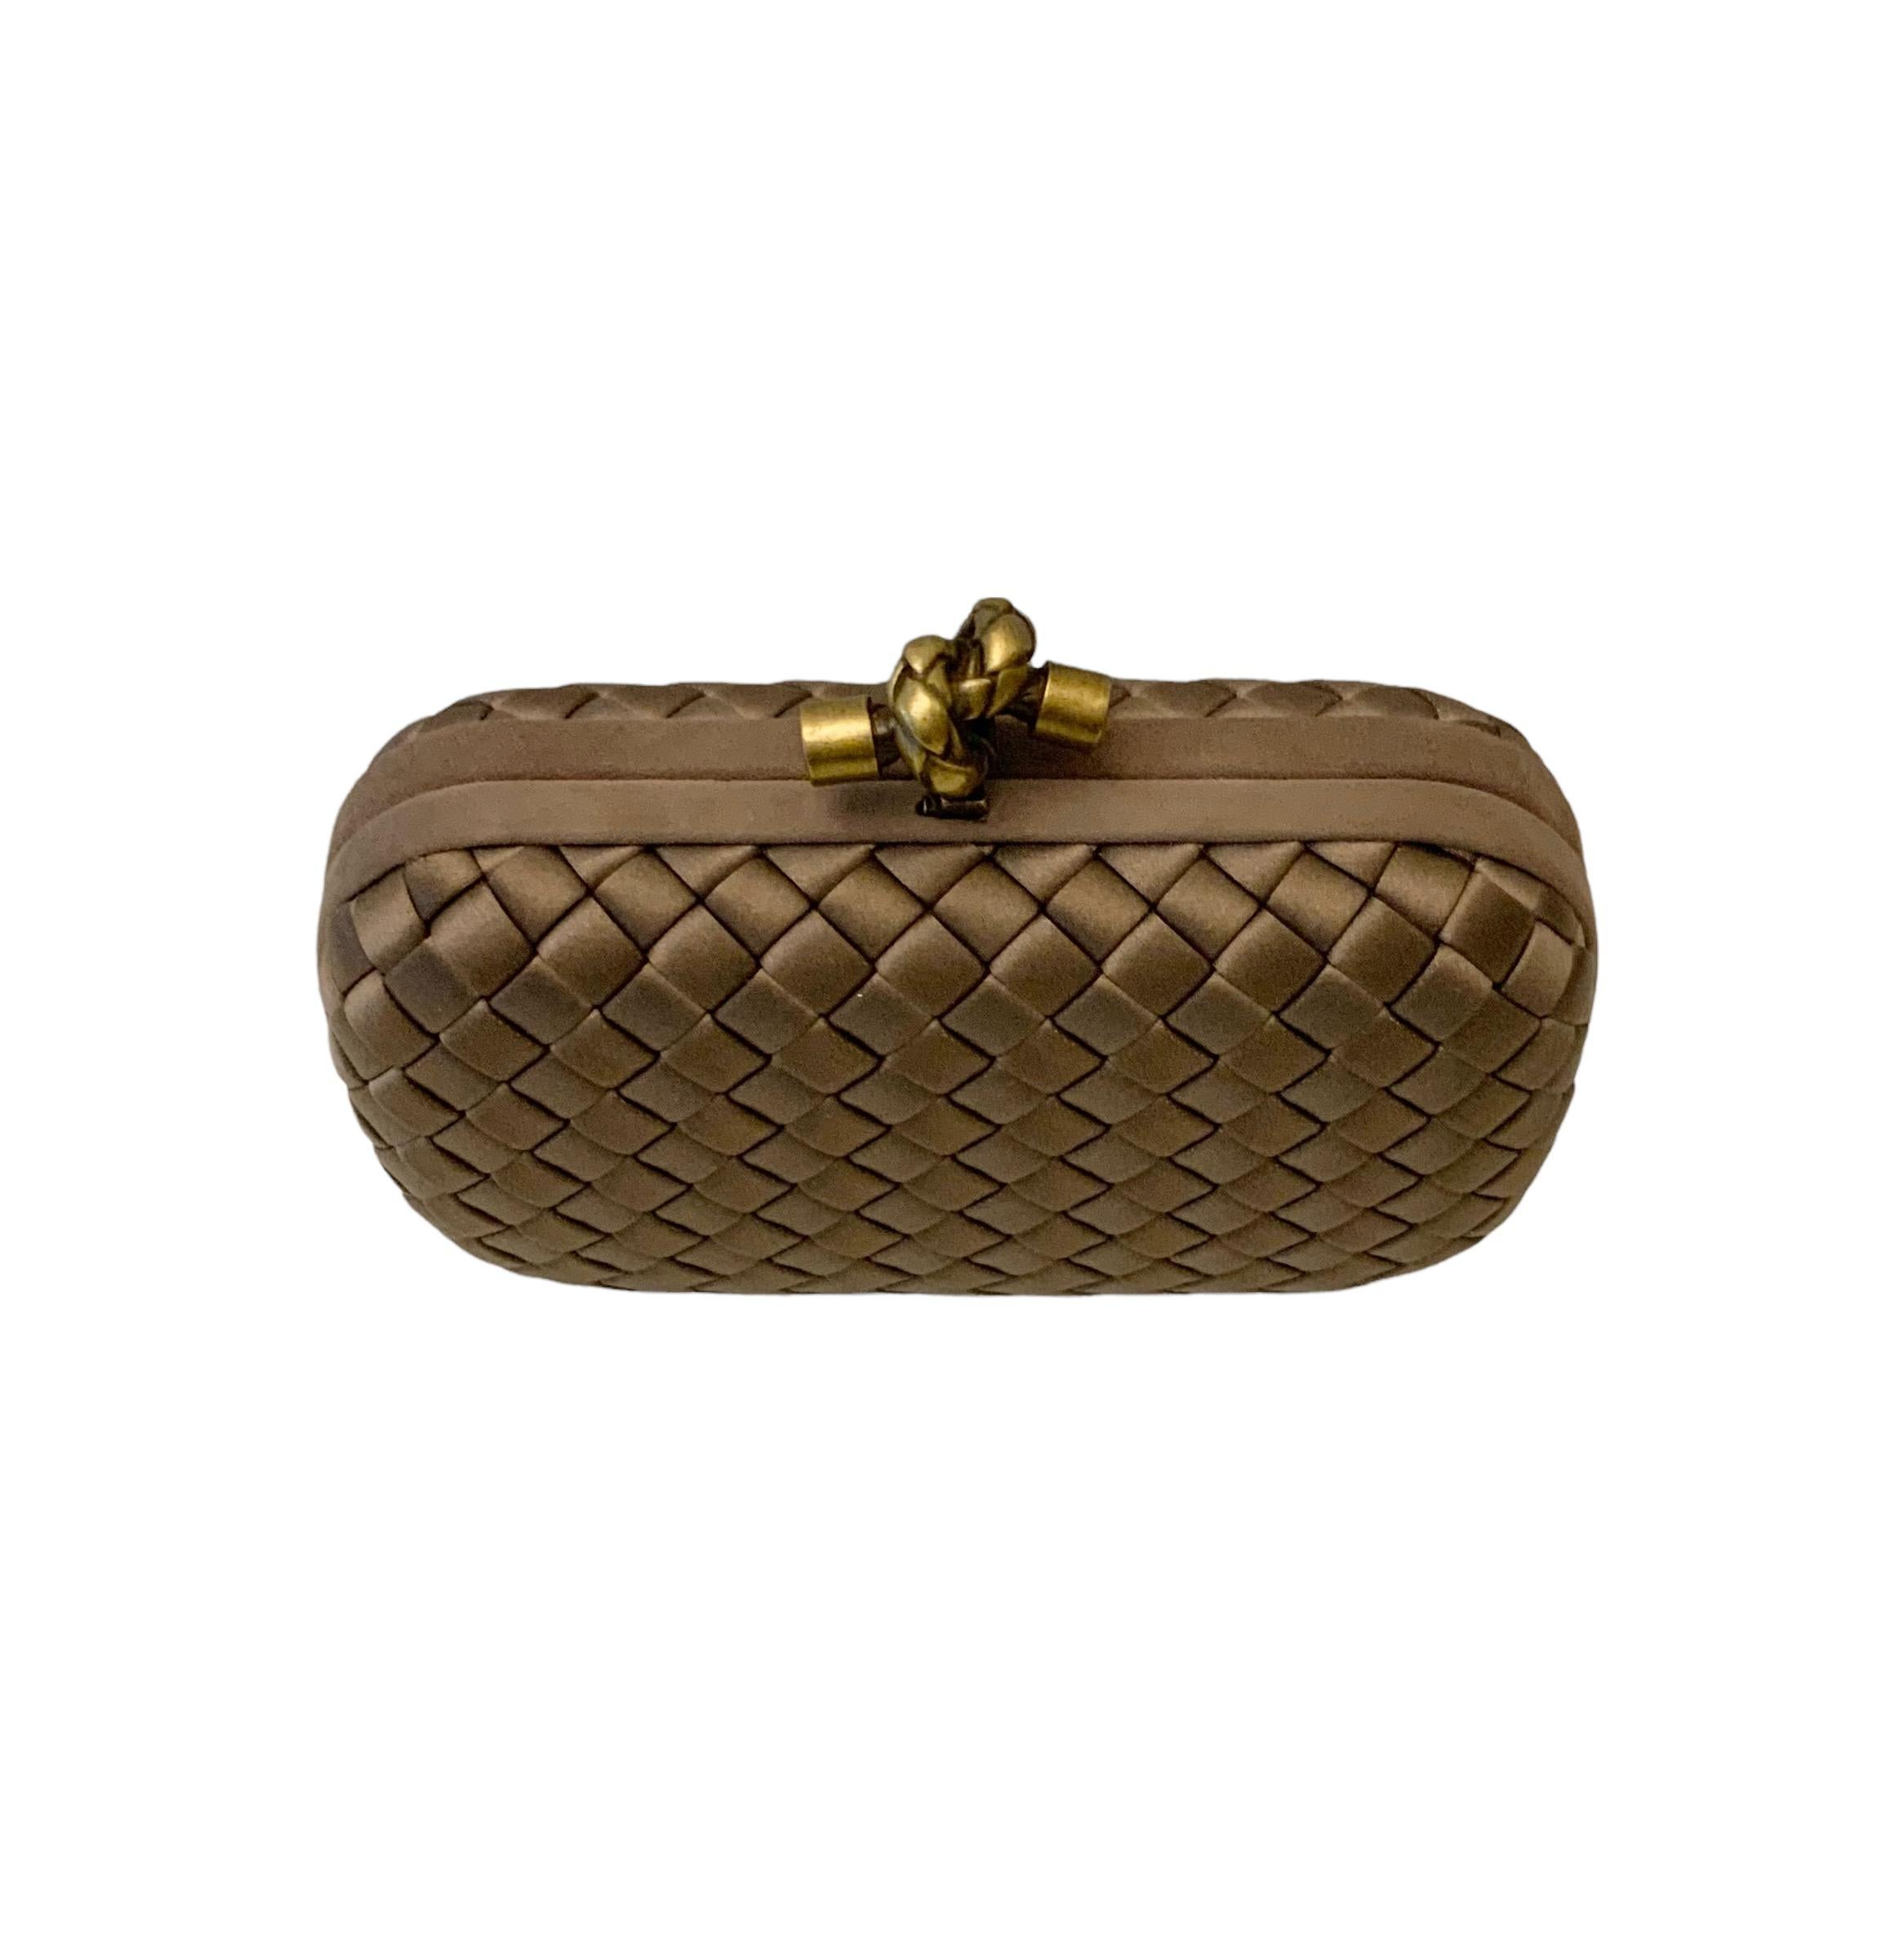 This pre-owned clutch Bag from the house of Bottega Veneta is a classic, timeless and striking piece.
This bag combines simplicity, beauty, and usability all at once.
Crafted in a light brown (taupe) satin, it is designed in the BV signature